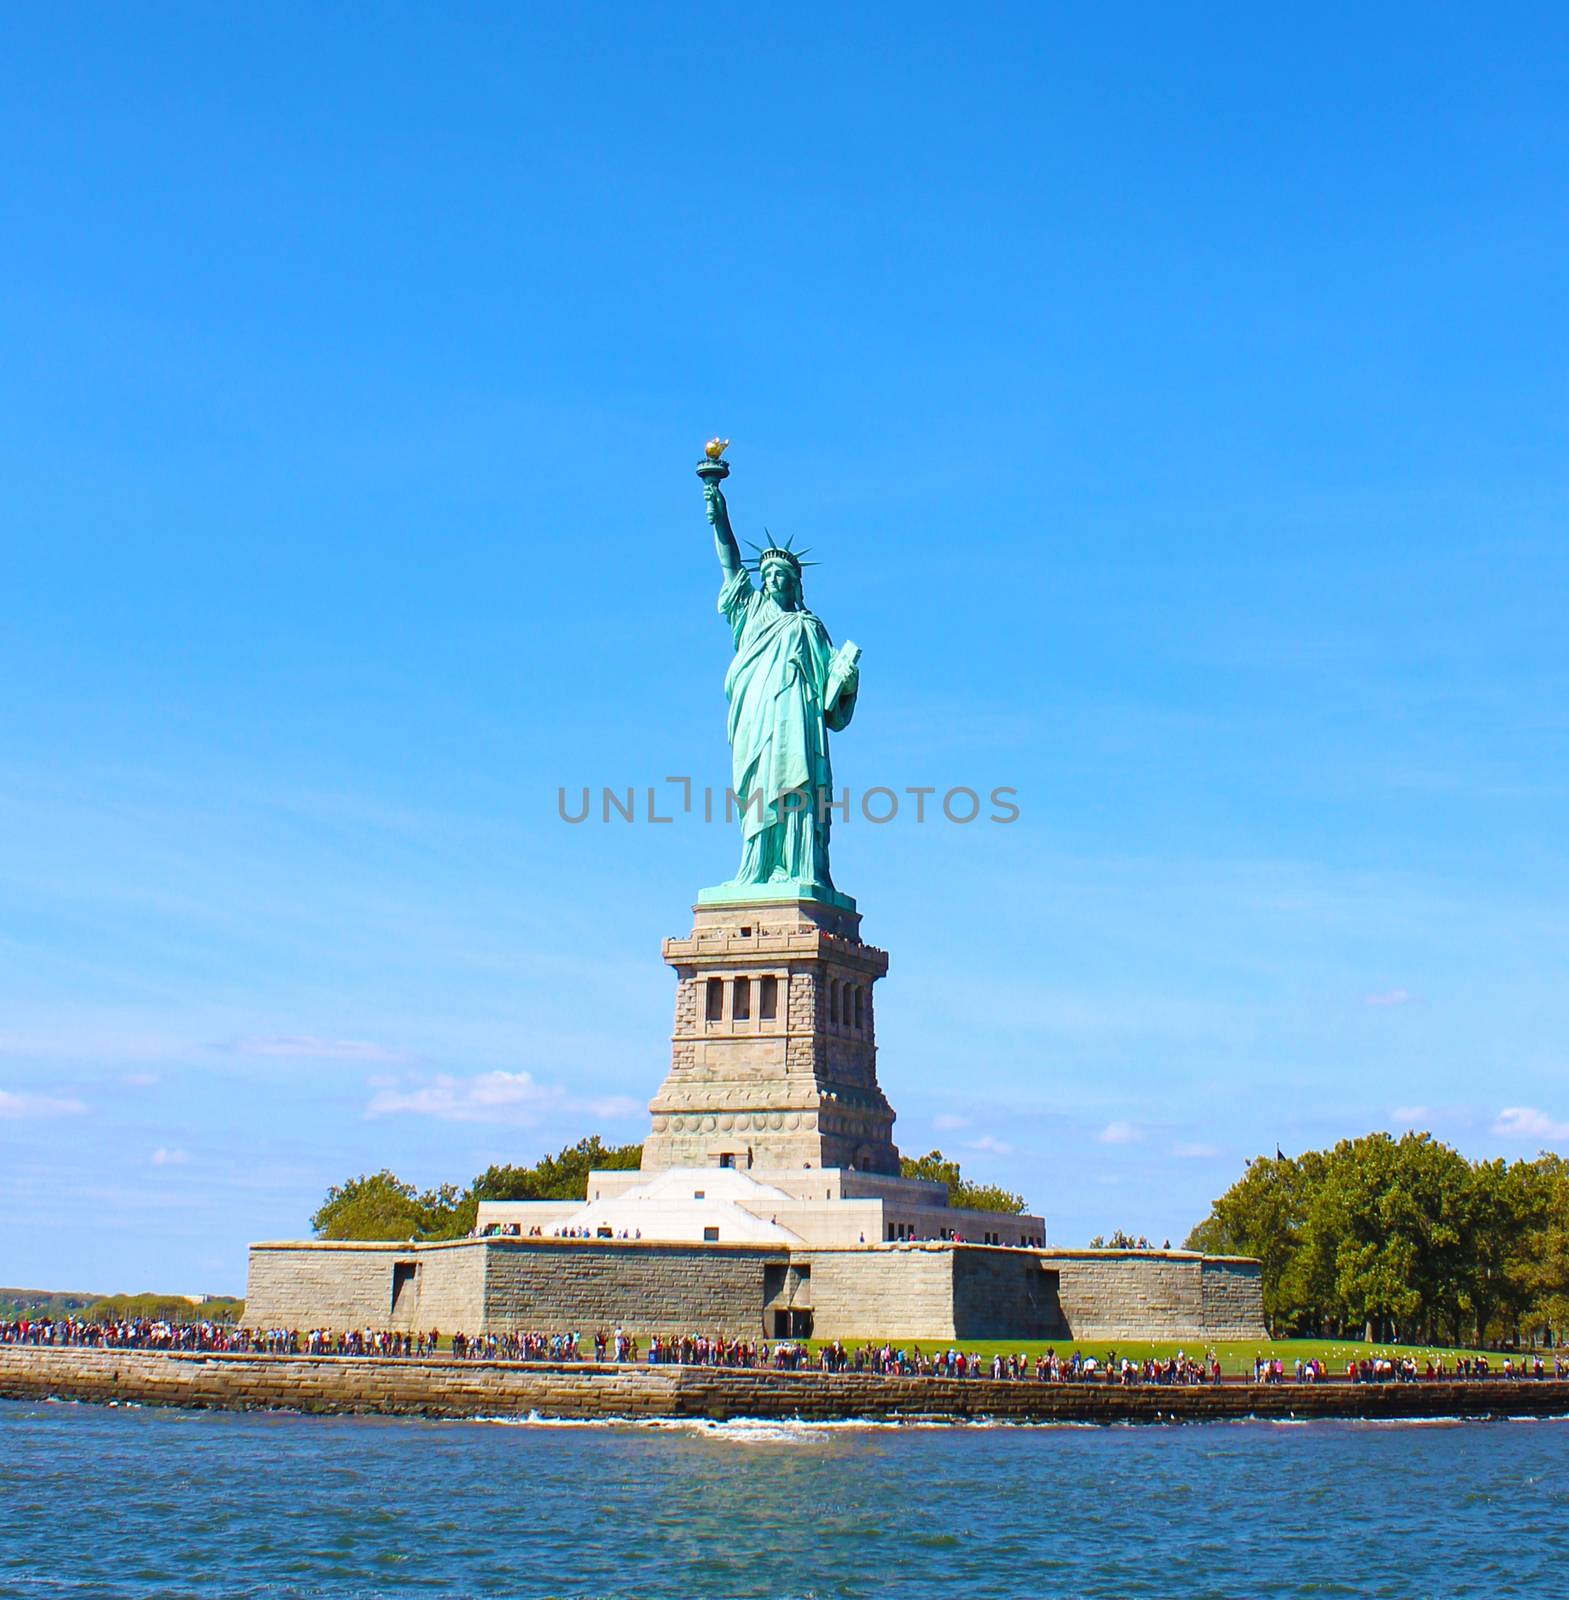 The Statue of Liberty from Liberty Harbor in New York.